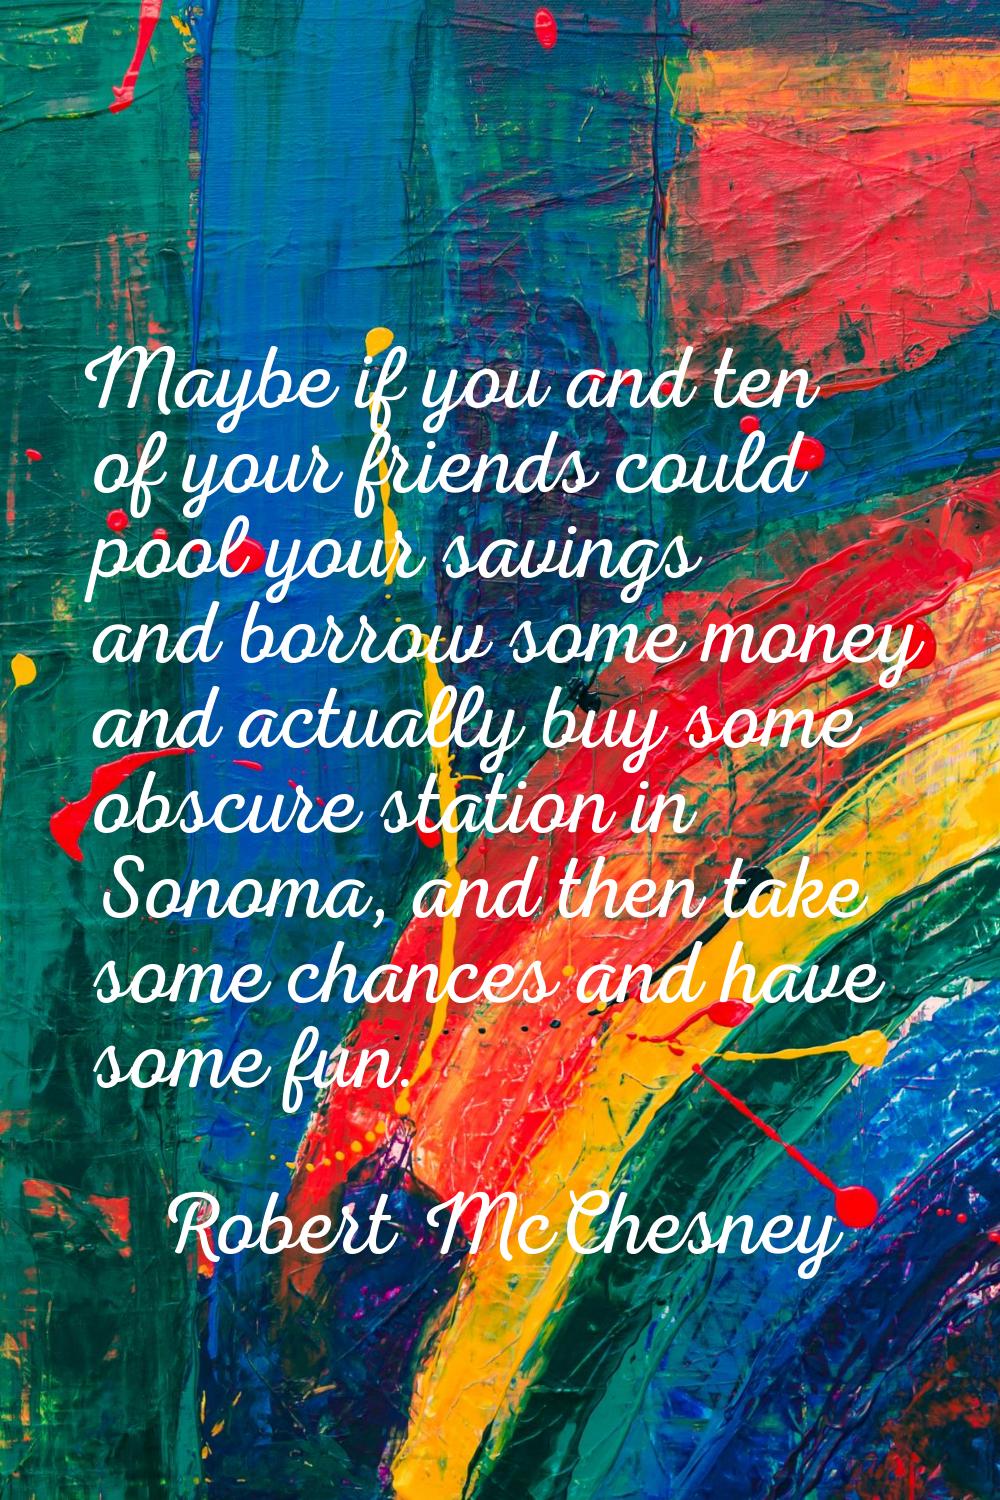 Maybe if you and ten of your friends could pool your savings and borrow some money and actually buy